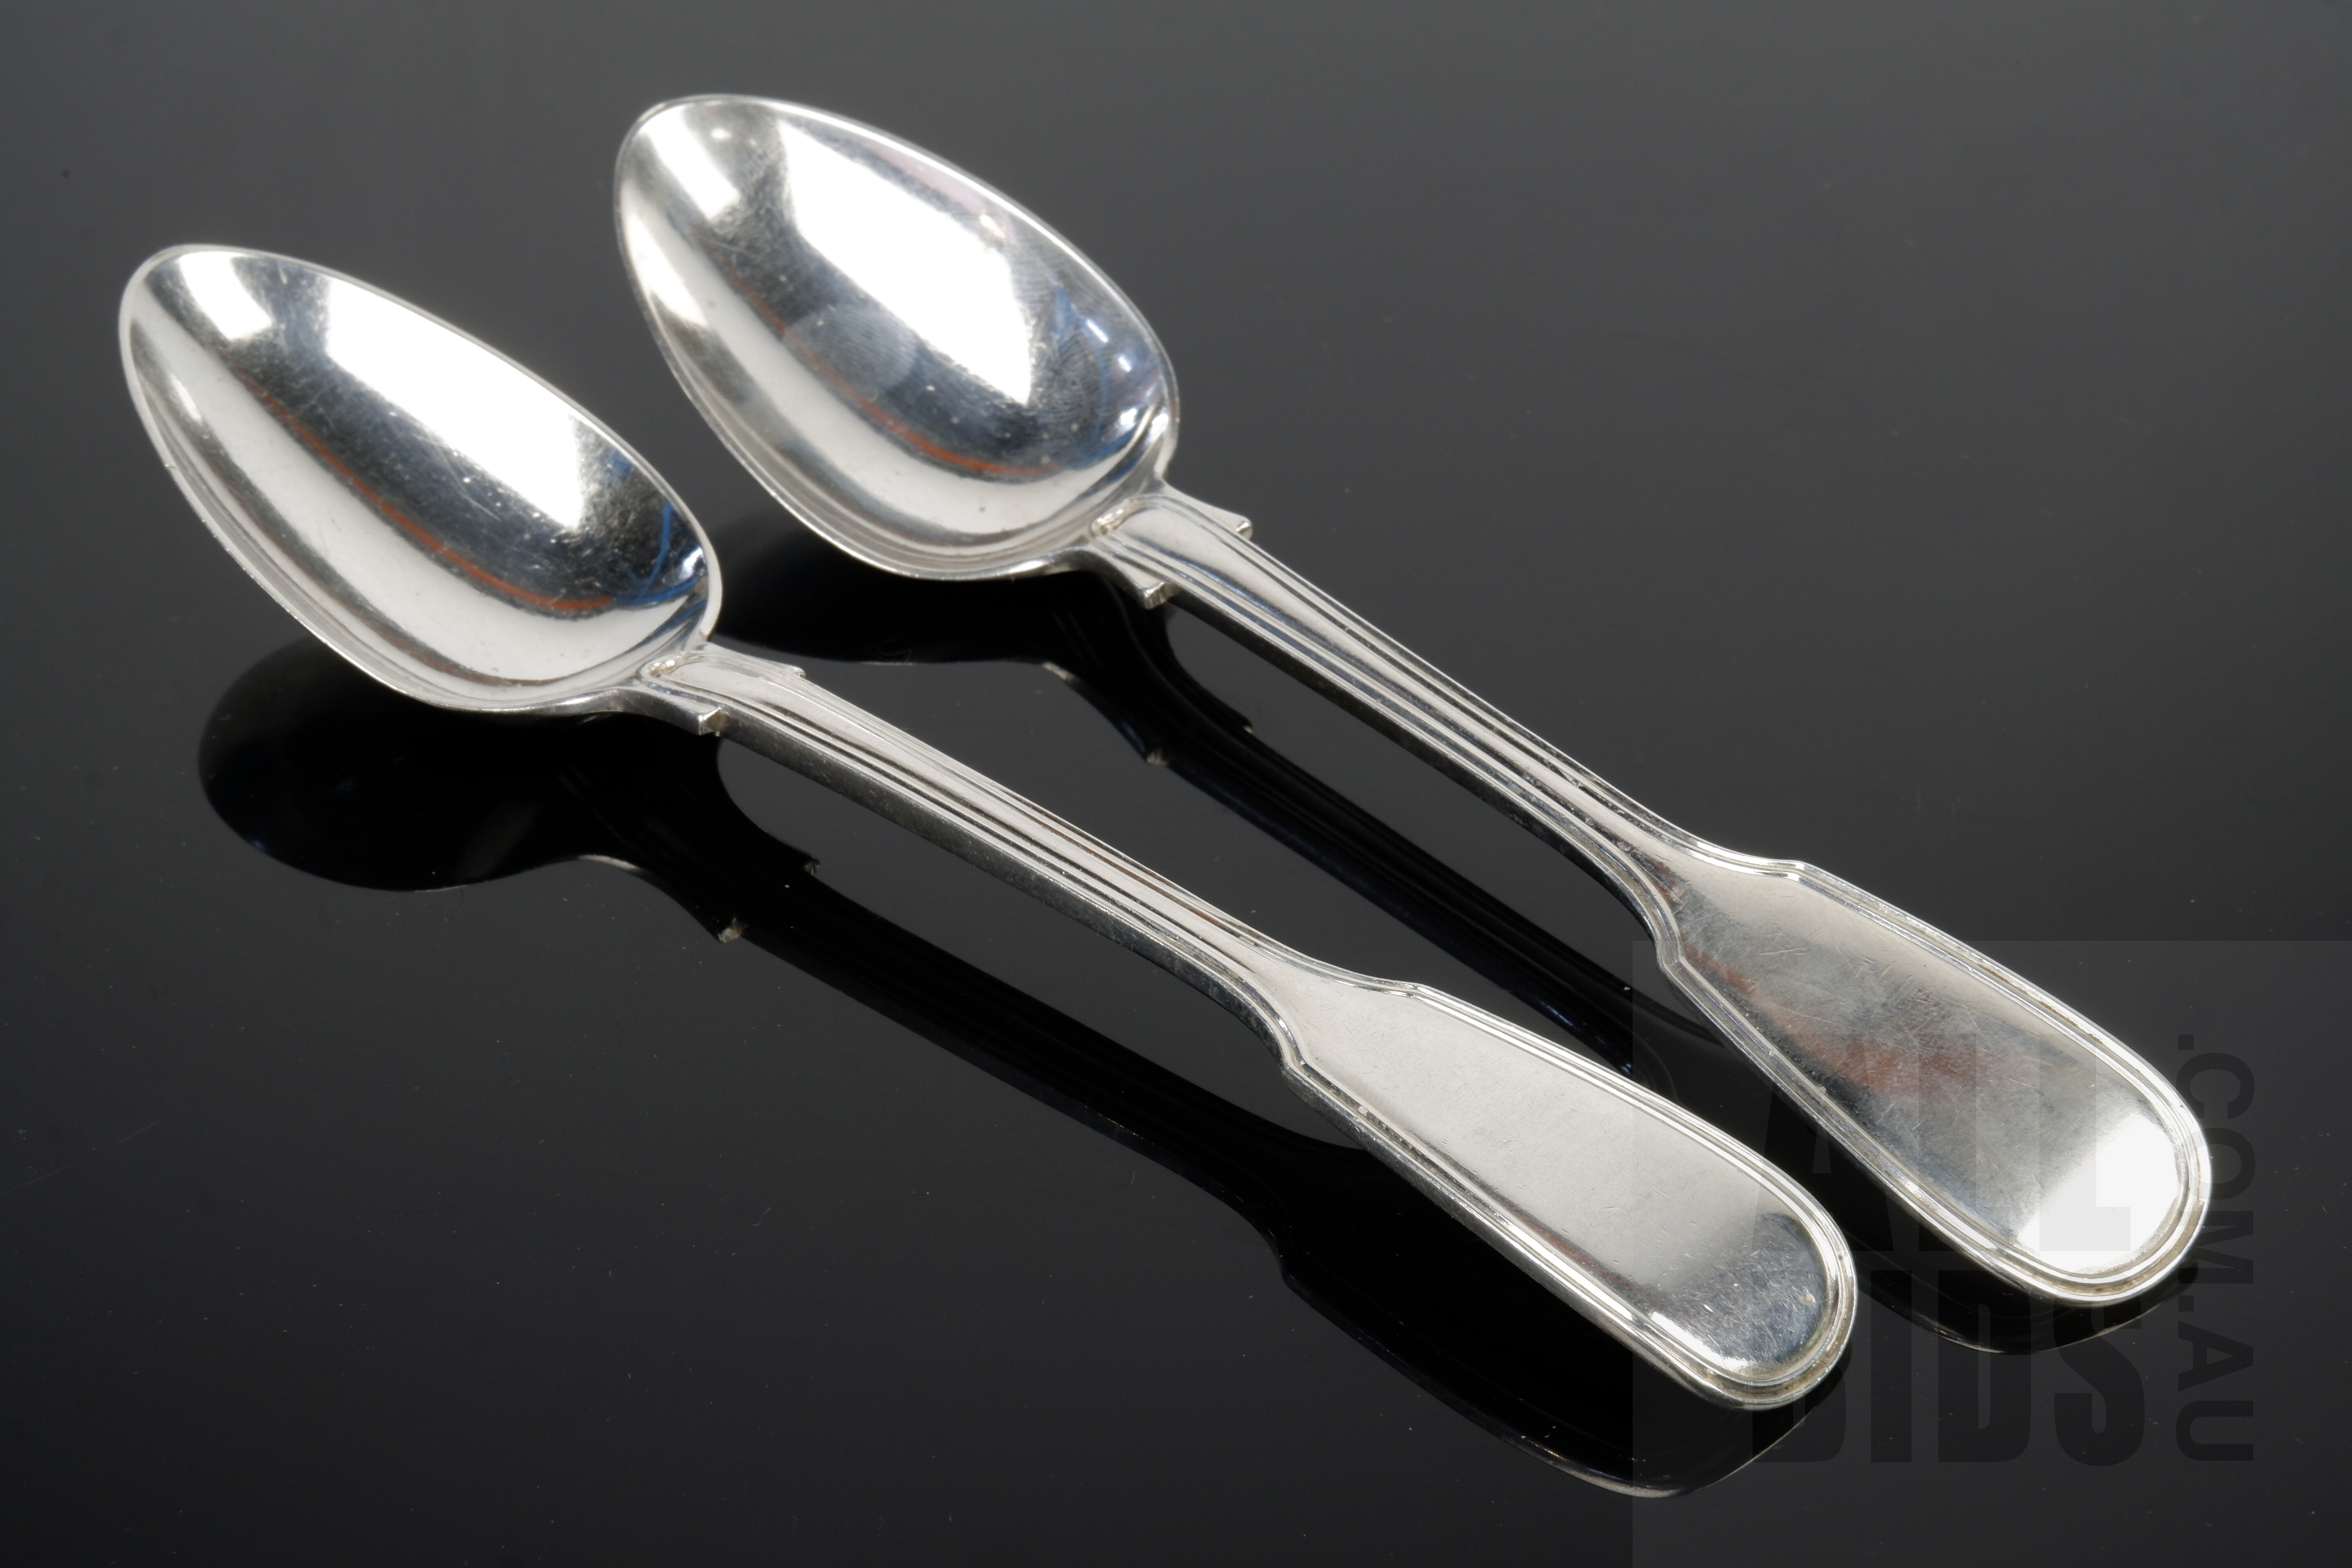 'Pair of Victorian Fiddle and Thread Spoons, London, Chawner & Co, 1855, 125g'